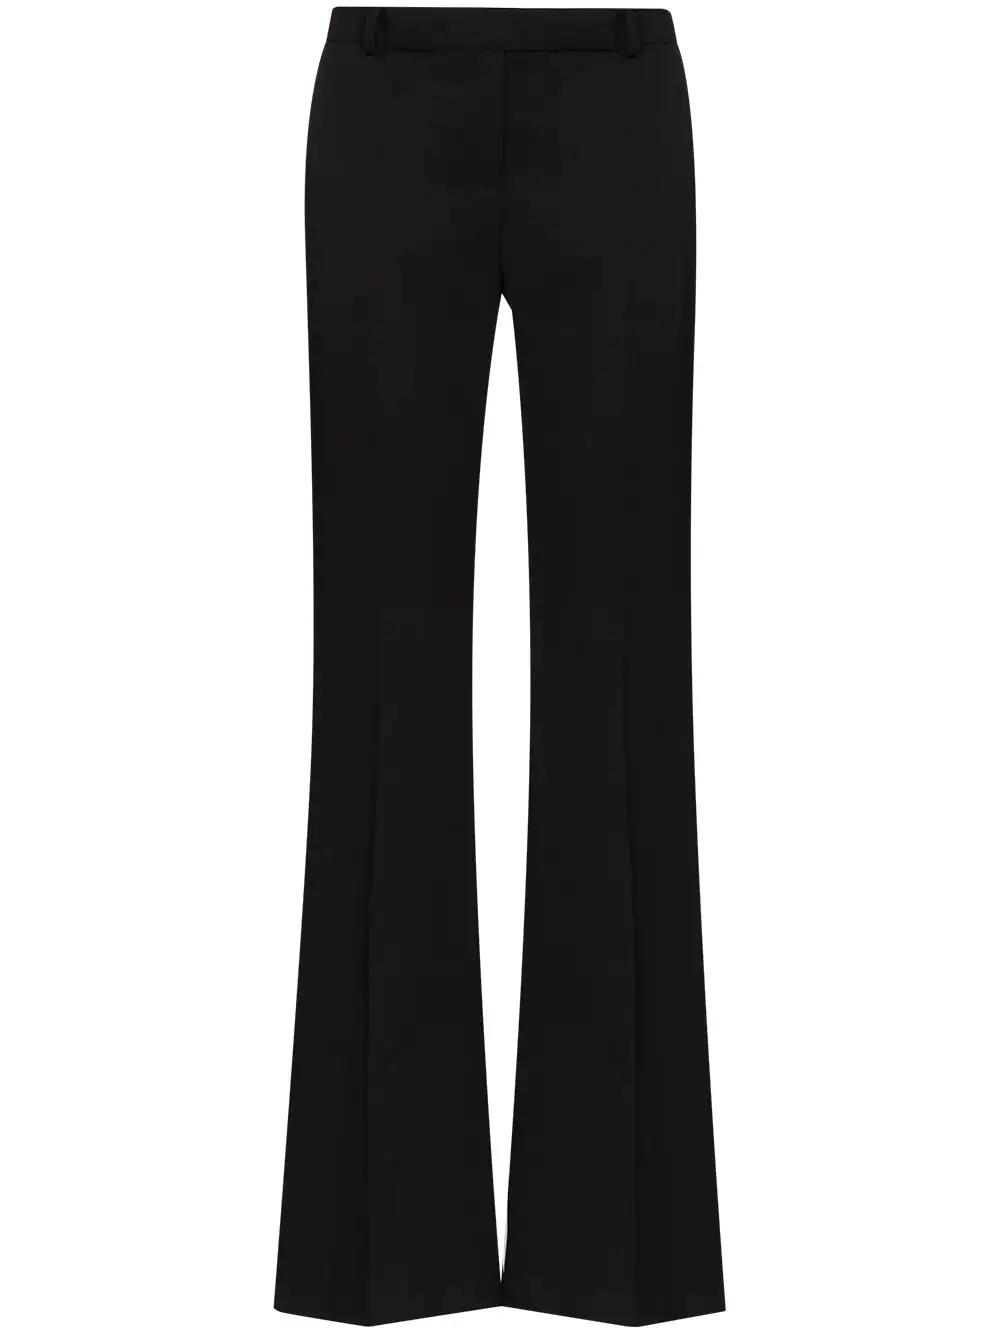 high-waisted wool trousers by ALEXANDER MCQUEEN